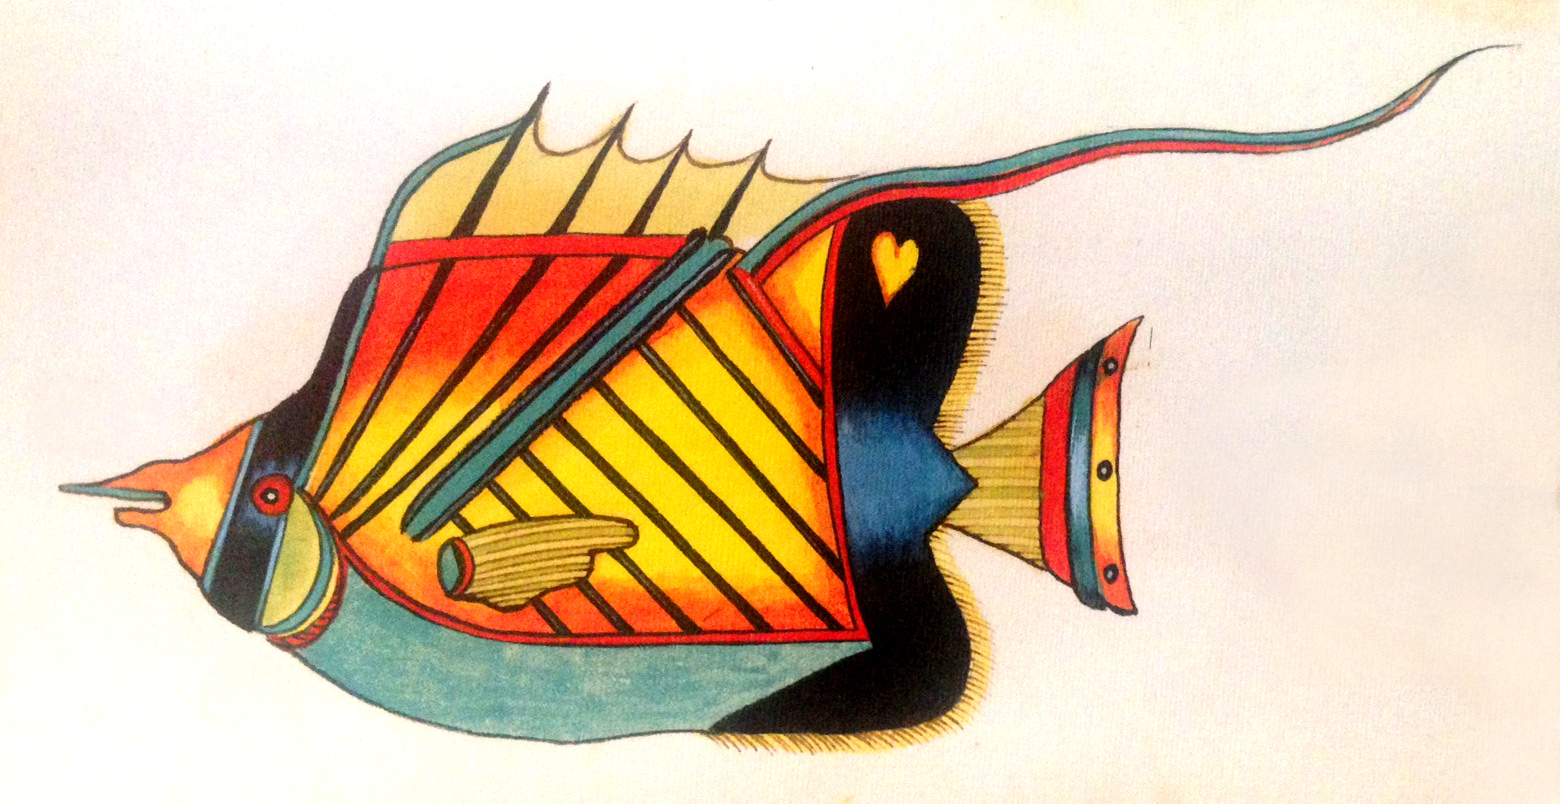 Sadly, the Threadfin Butterflyfish doesn't actually have a heart-shaped spot in its dorsal fin.